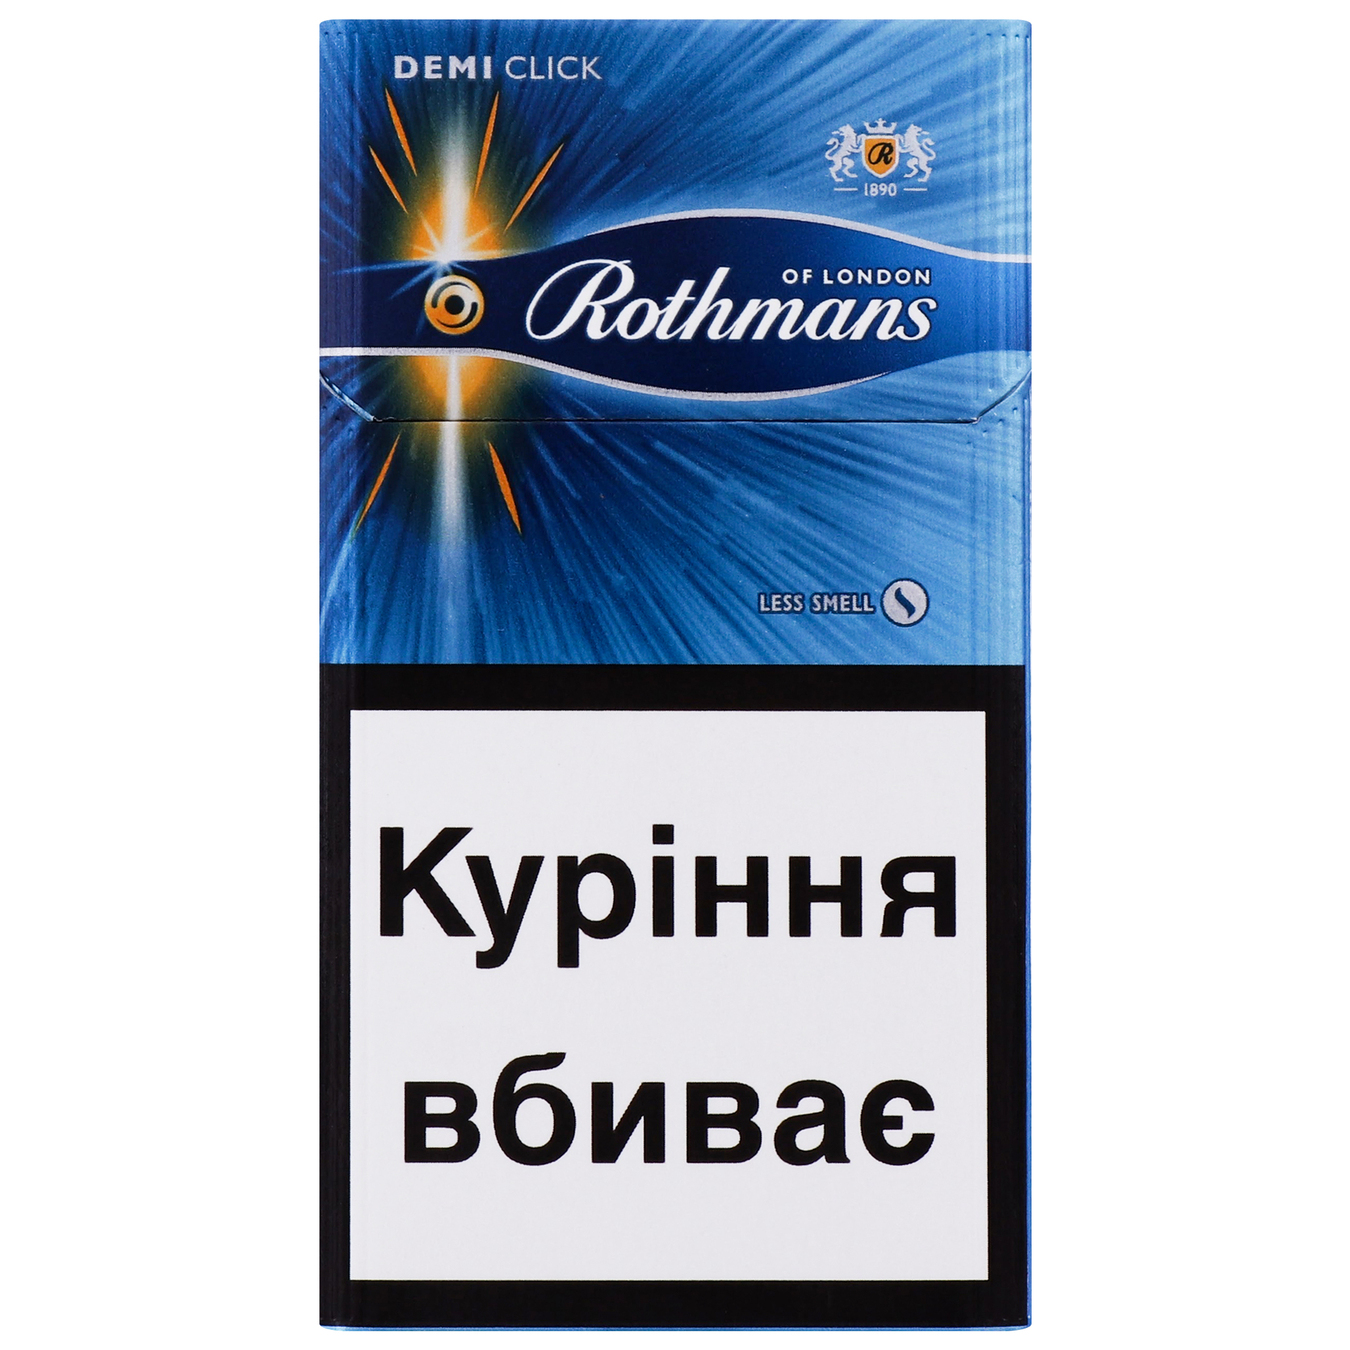 Rothmans Demi Click Amber cigarettes with filter 20 pcs (the price is indicated without excise tax)